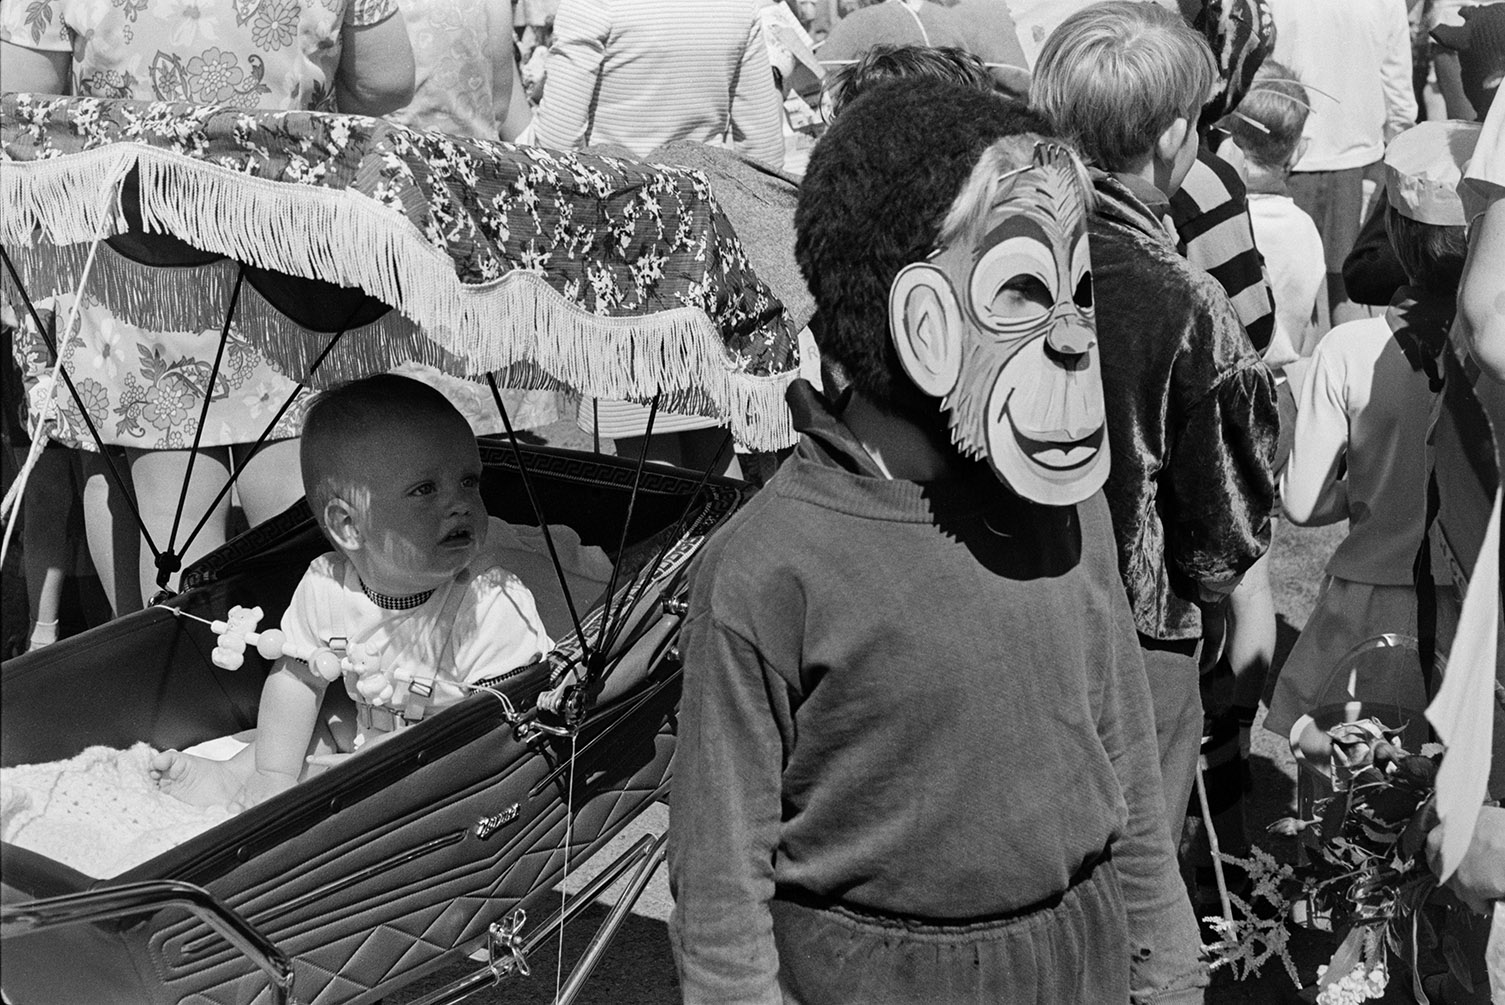 A child wearing a monkey mask stood in front of a pram with a baby in it at Winkleigh Fair.